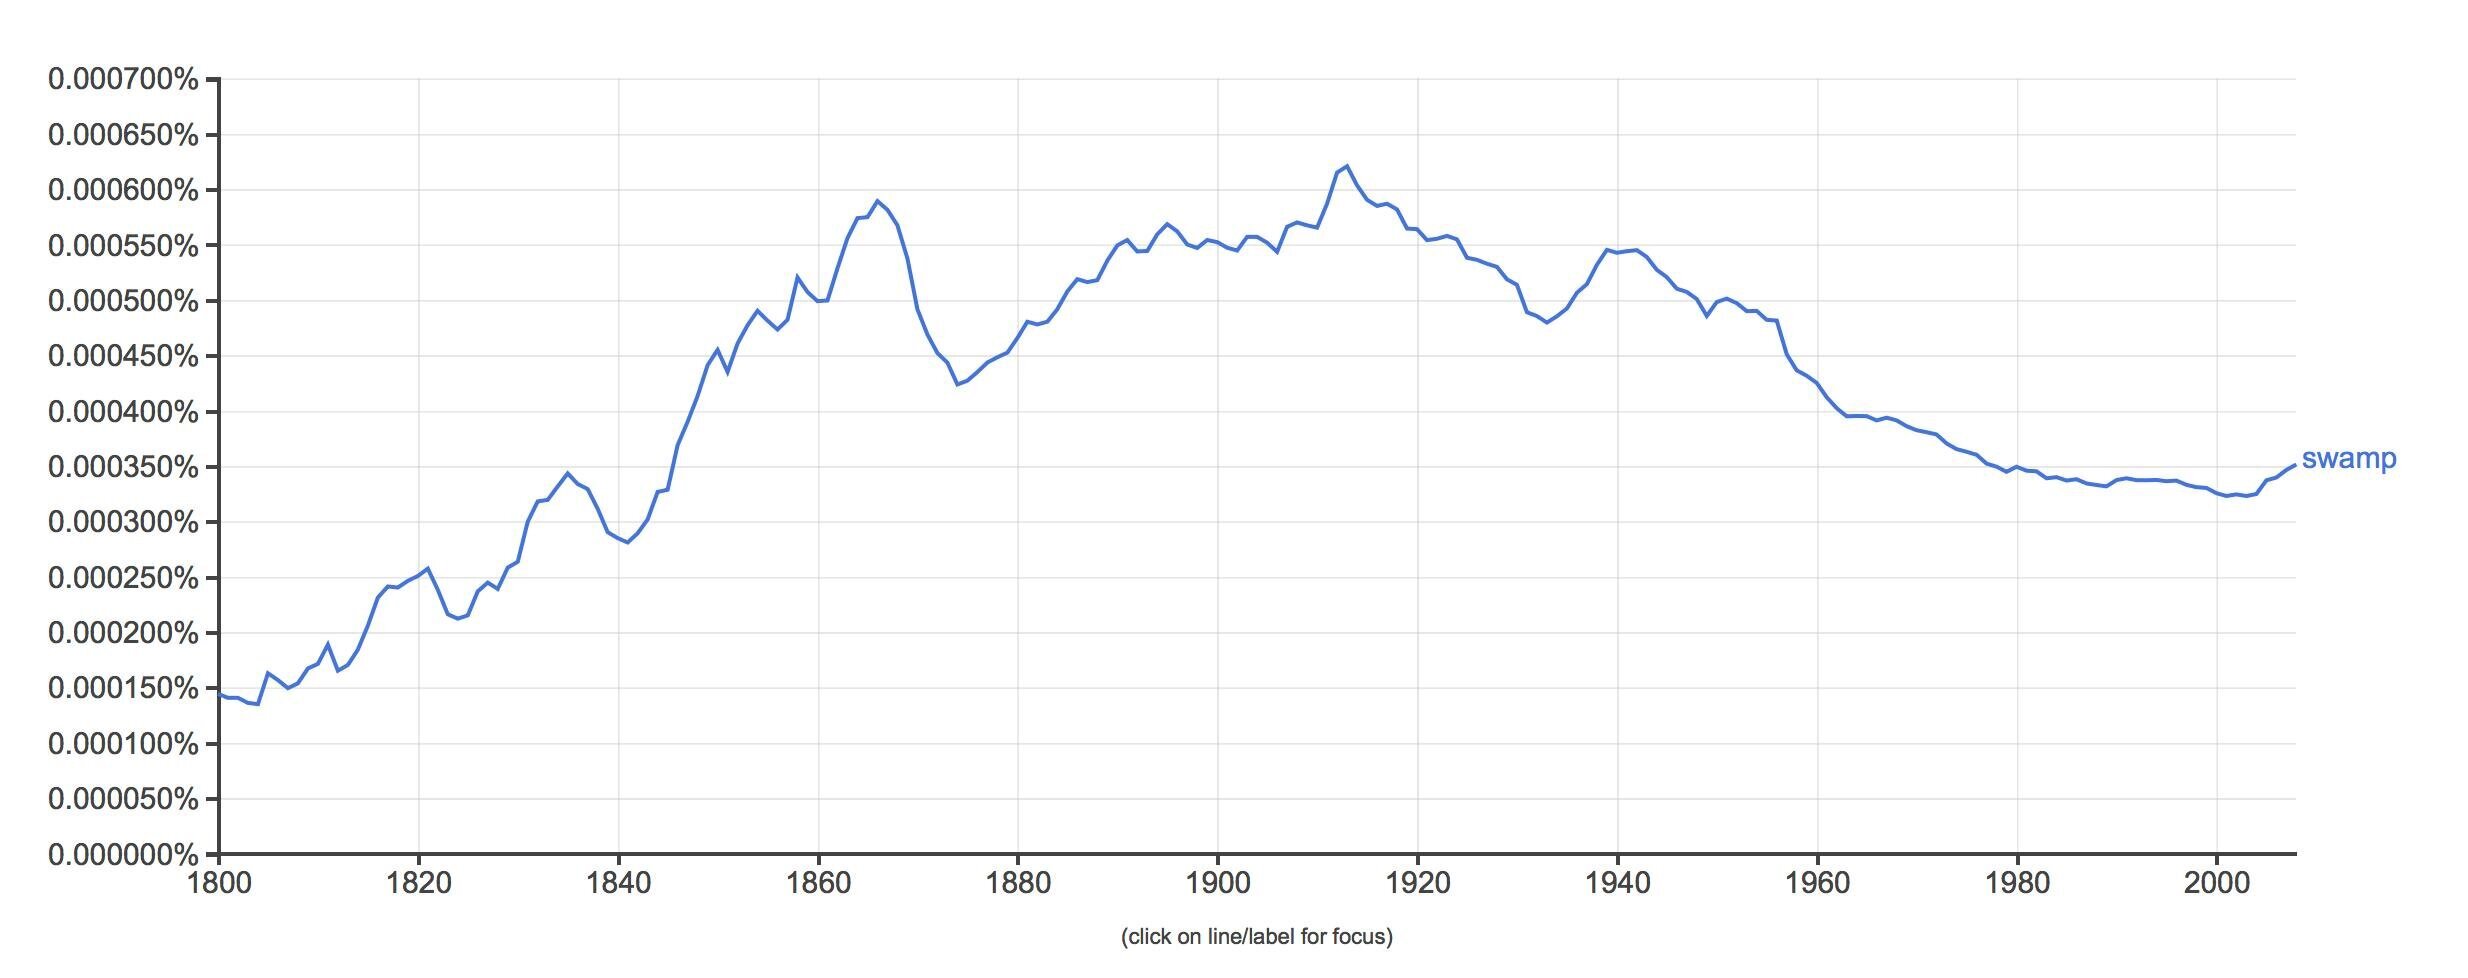 Google frequency of use of word :‘swamp’